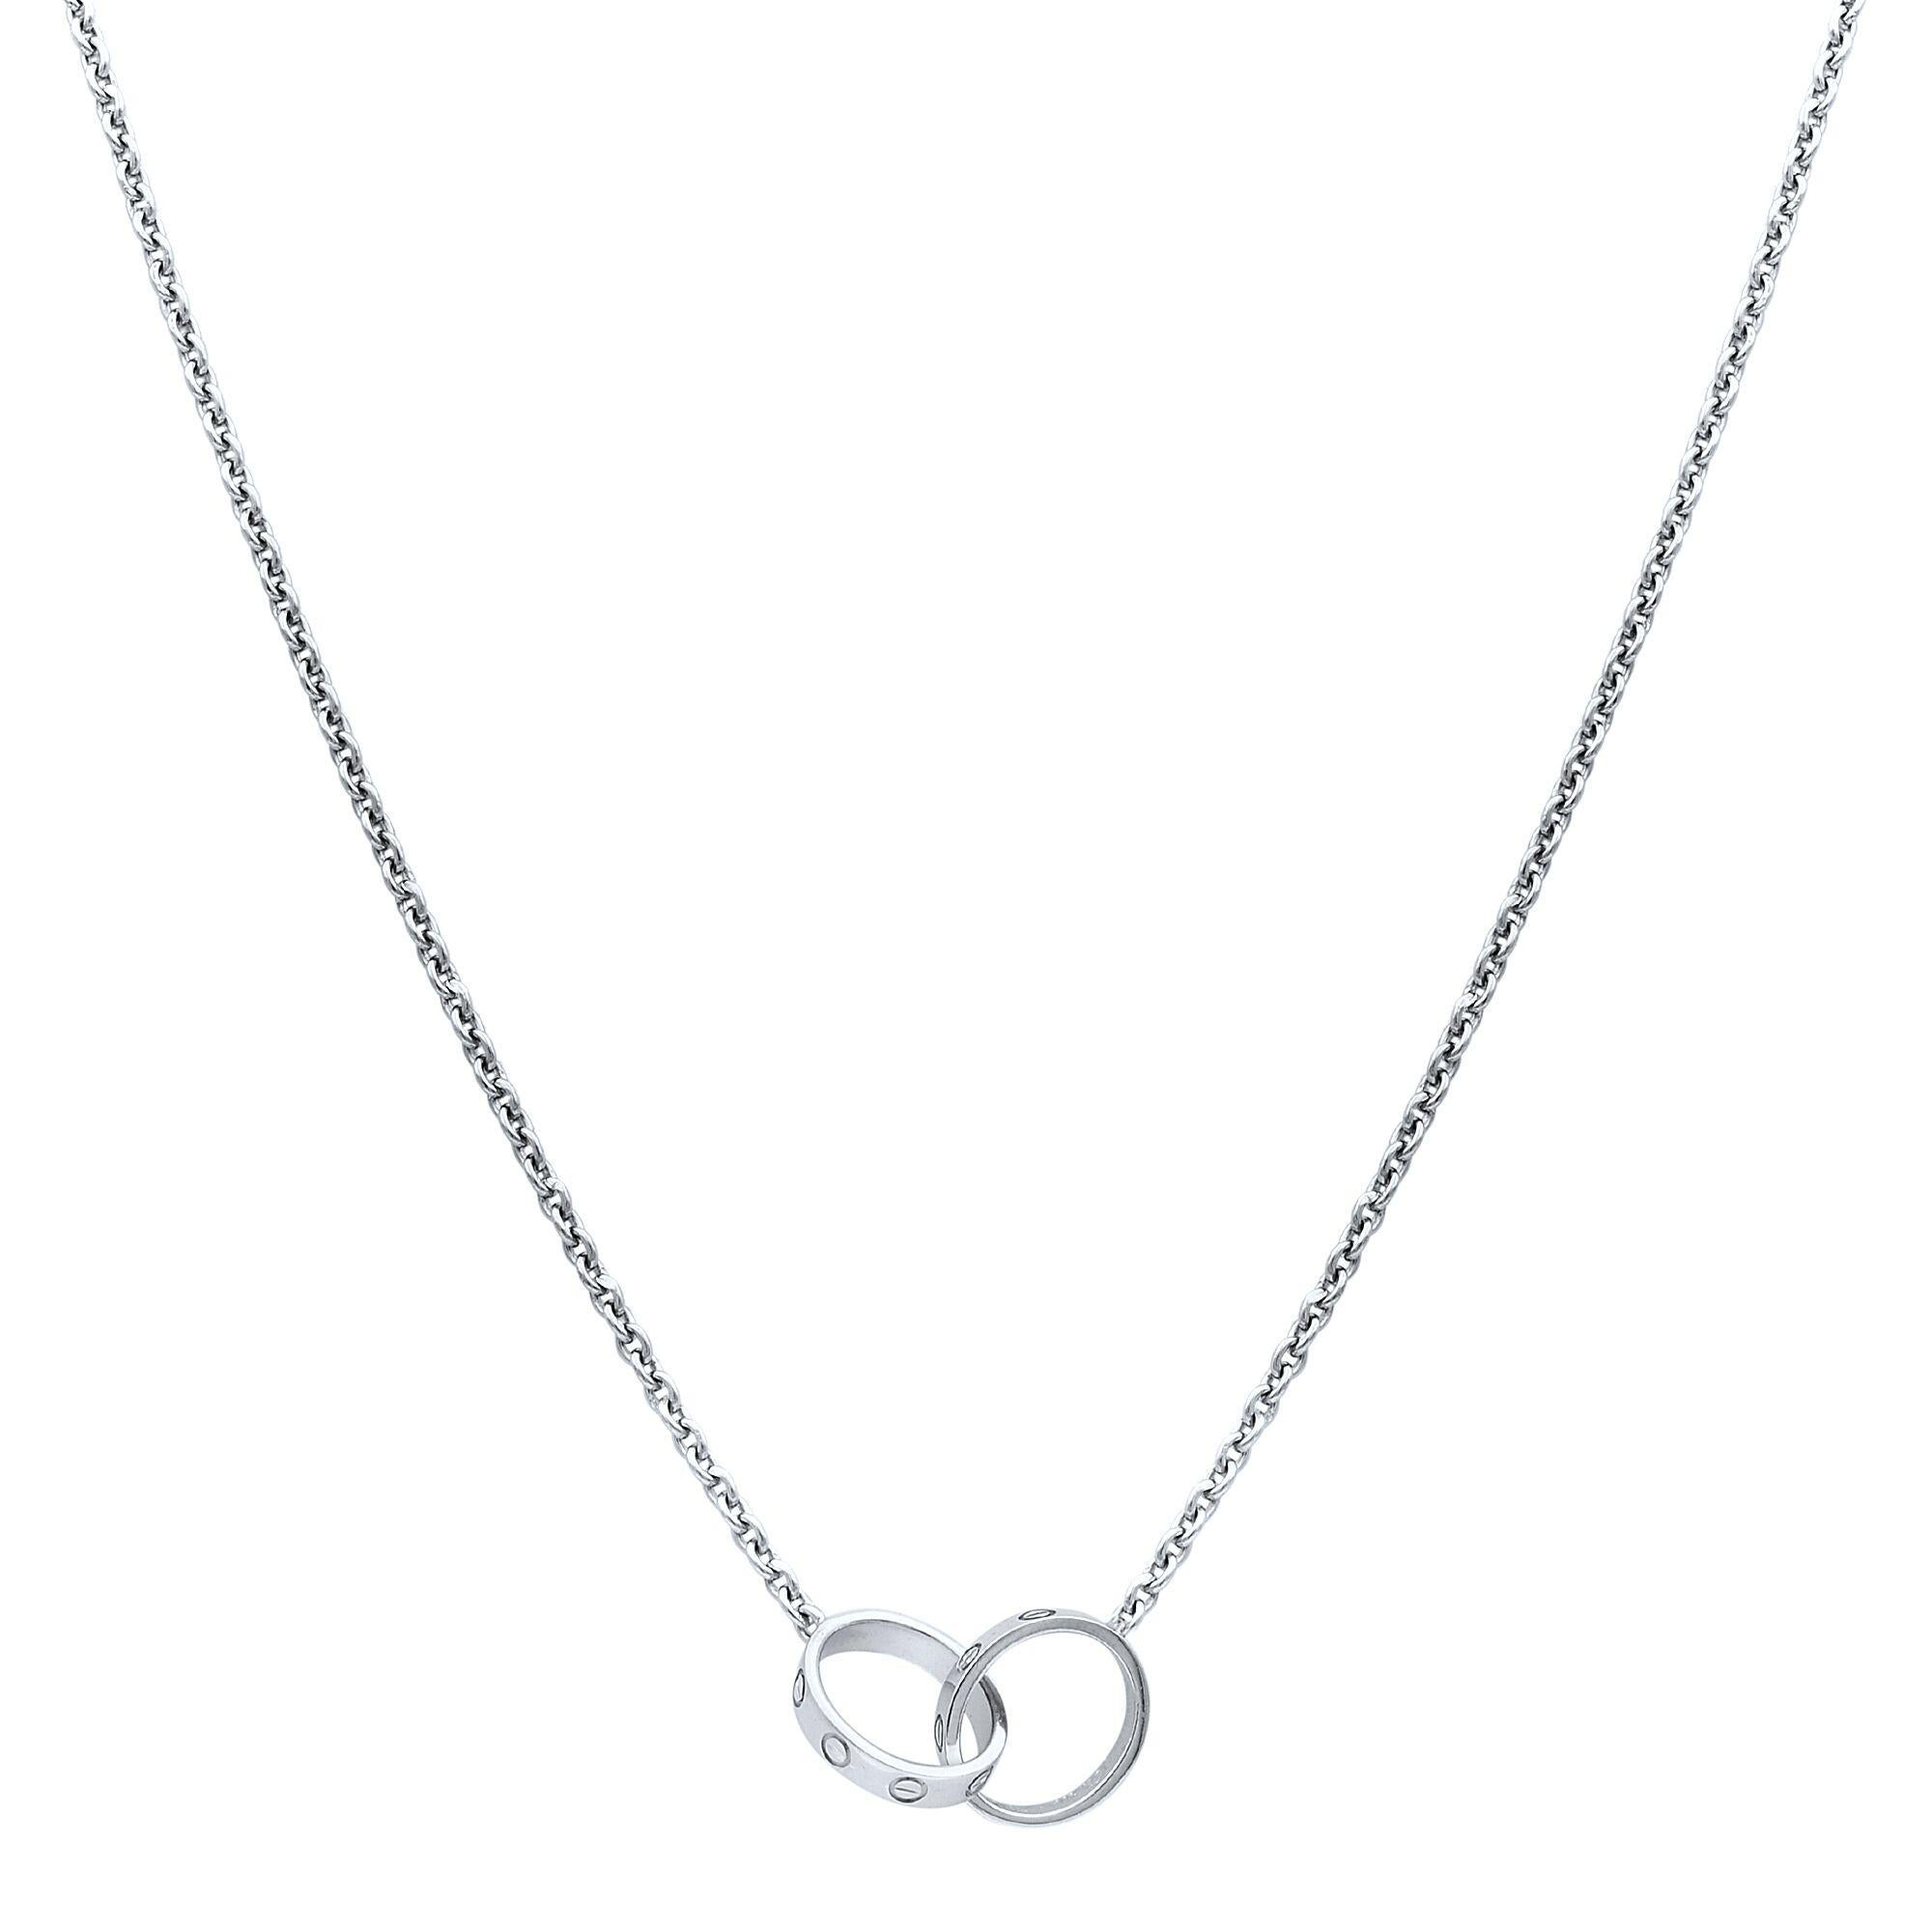 Cartier Love necklace, 18K white gold. The necklace features two interlocking circular motifs in the center, displaying the iconic screw motif throughout the center. Inner diameter 8mm. Chain Length: 17 inches. 
Excellent pre-owned condition, box